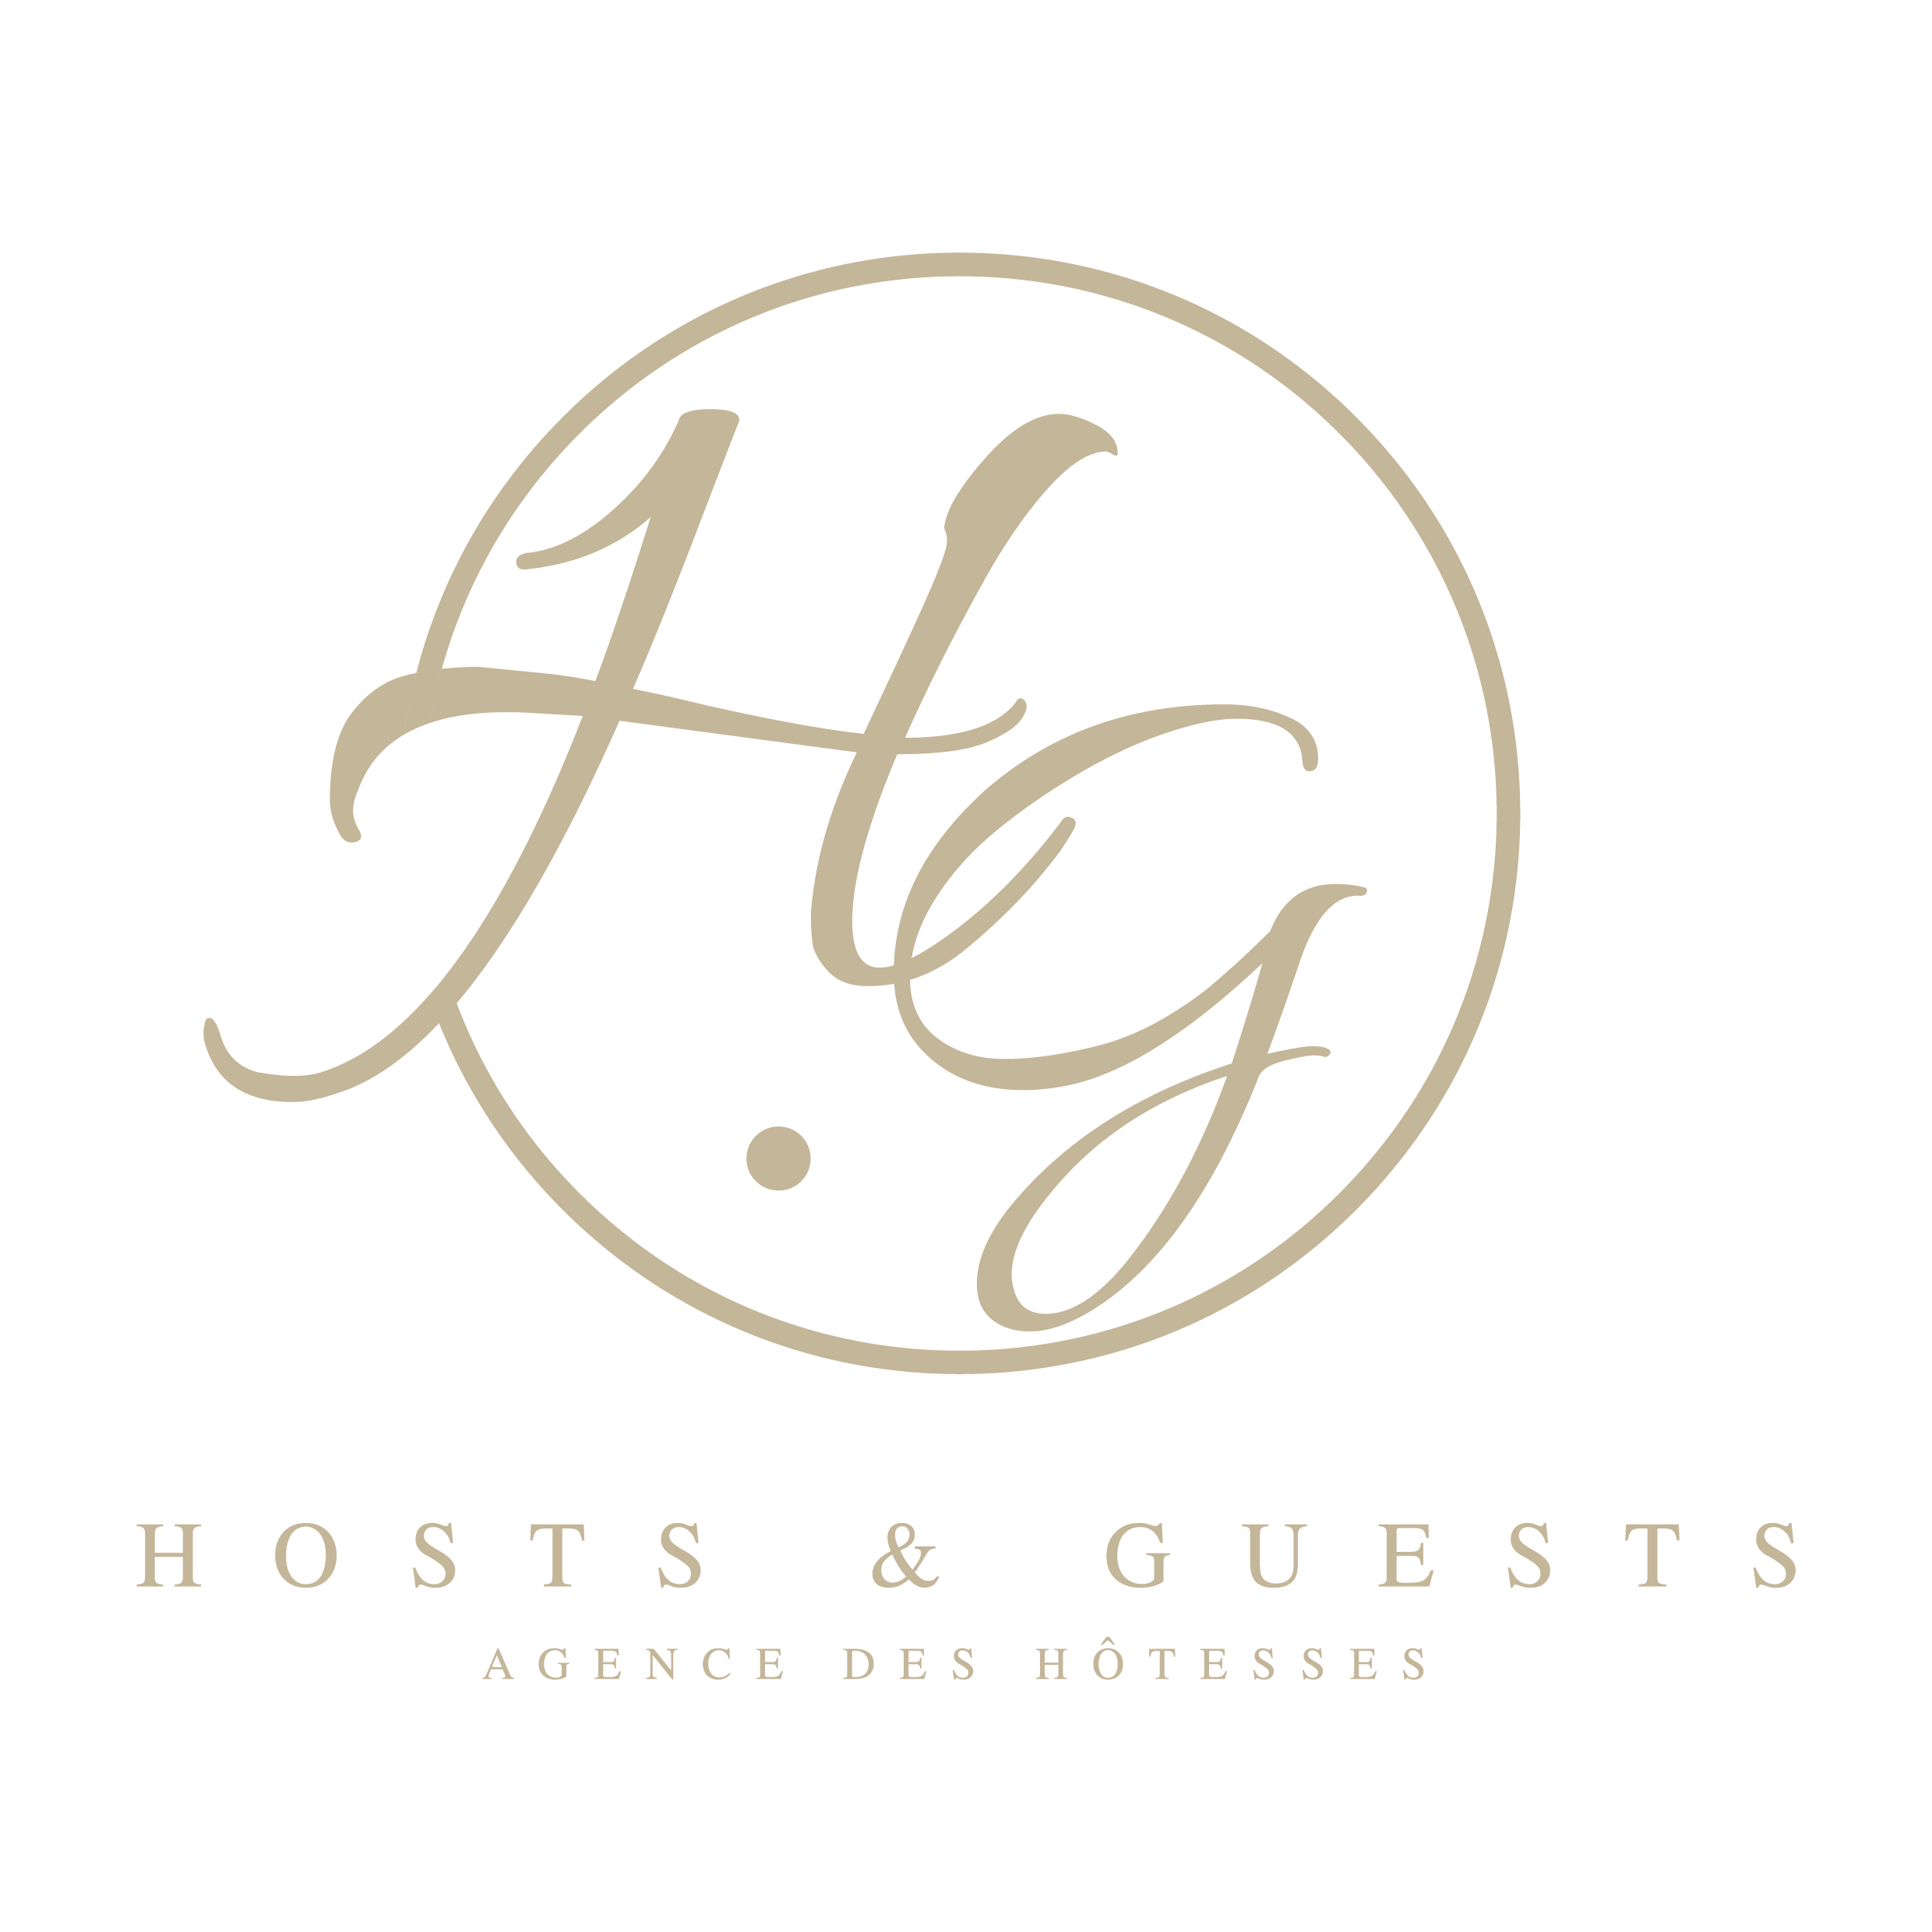 Hosts and Guests logo